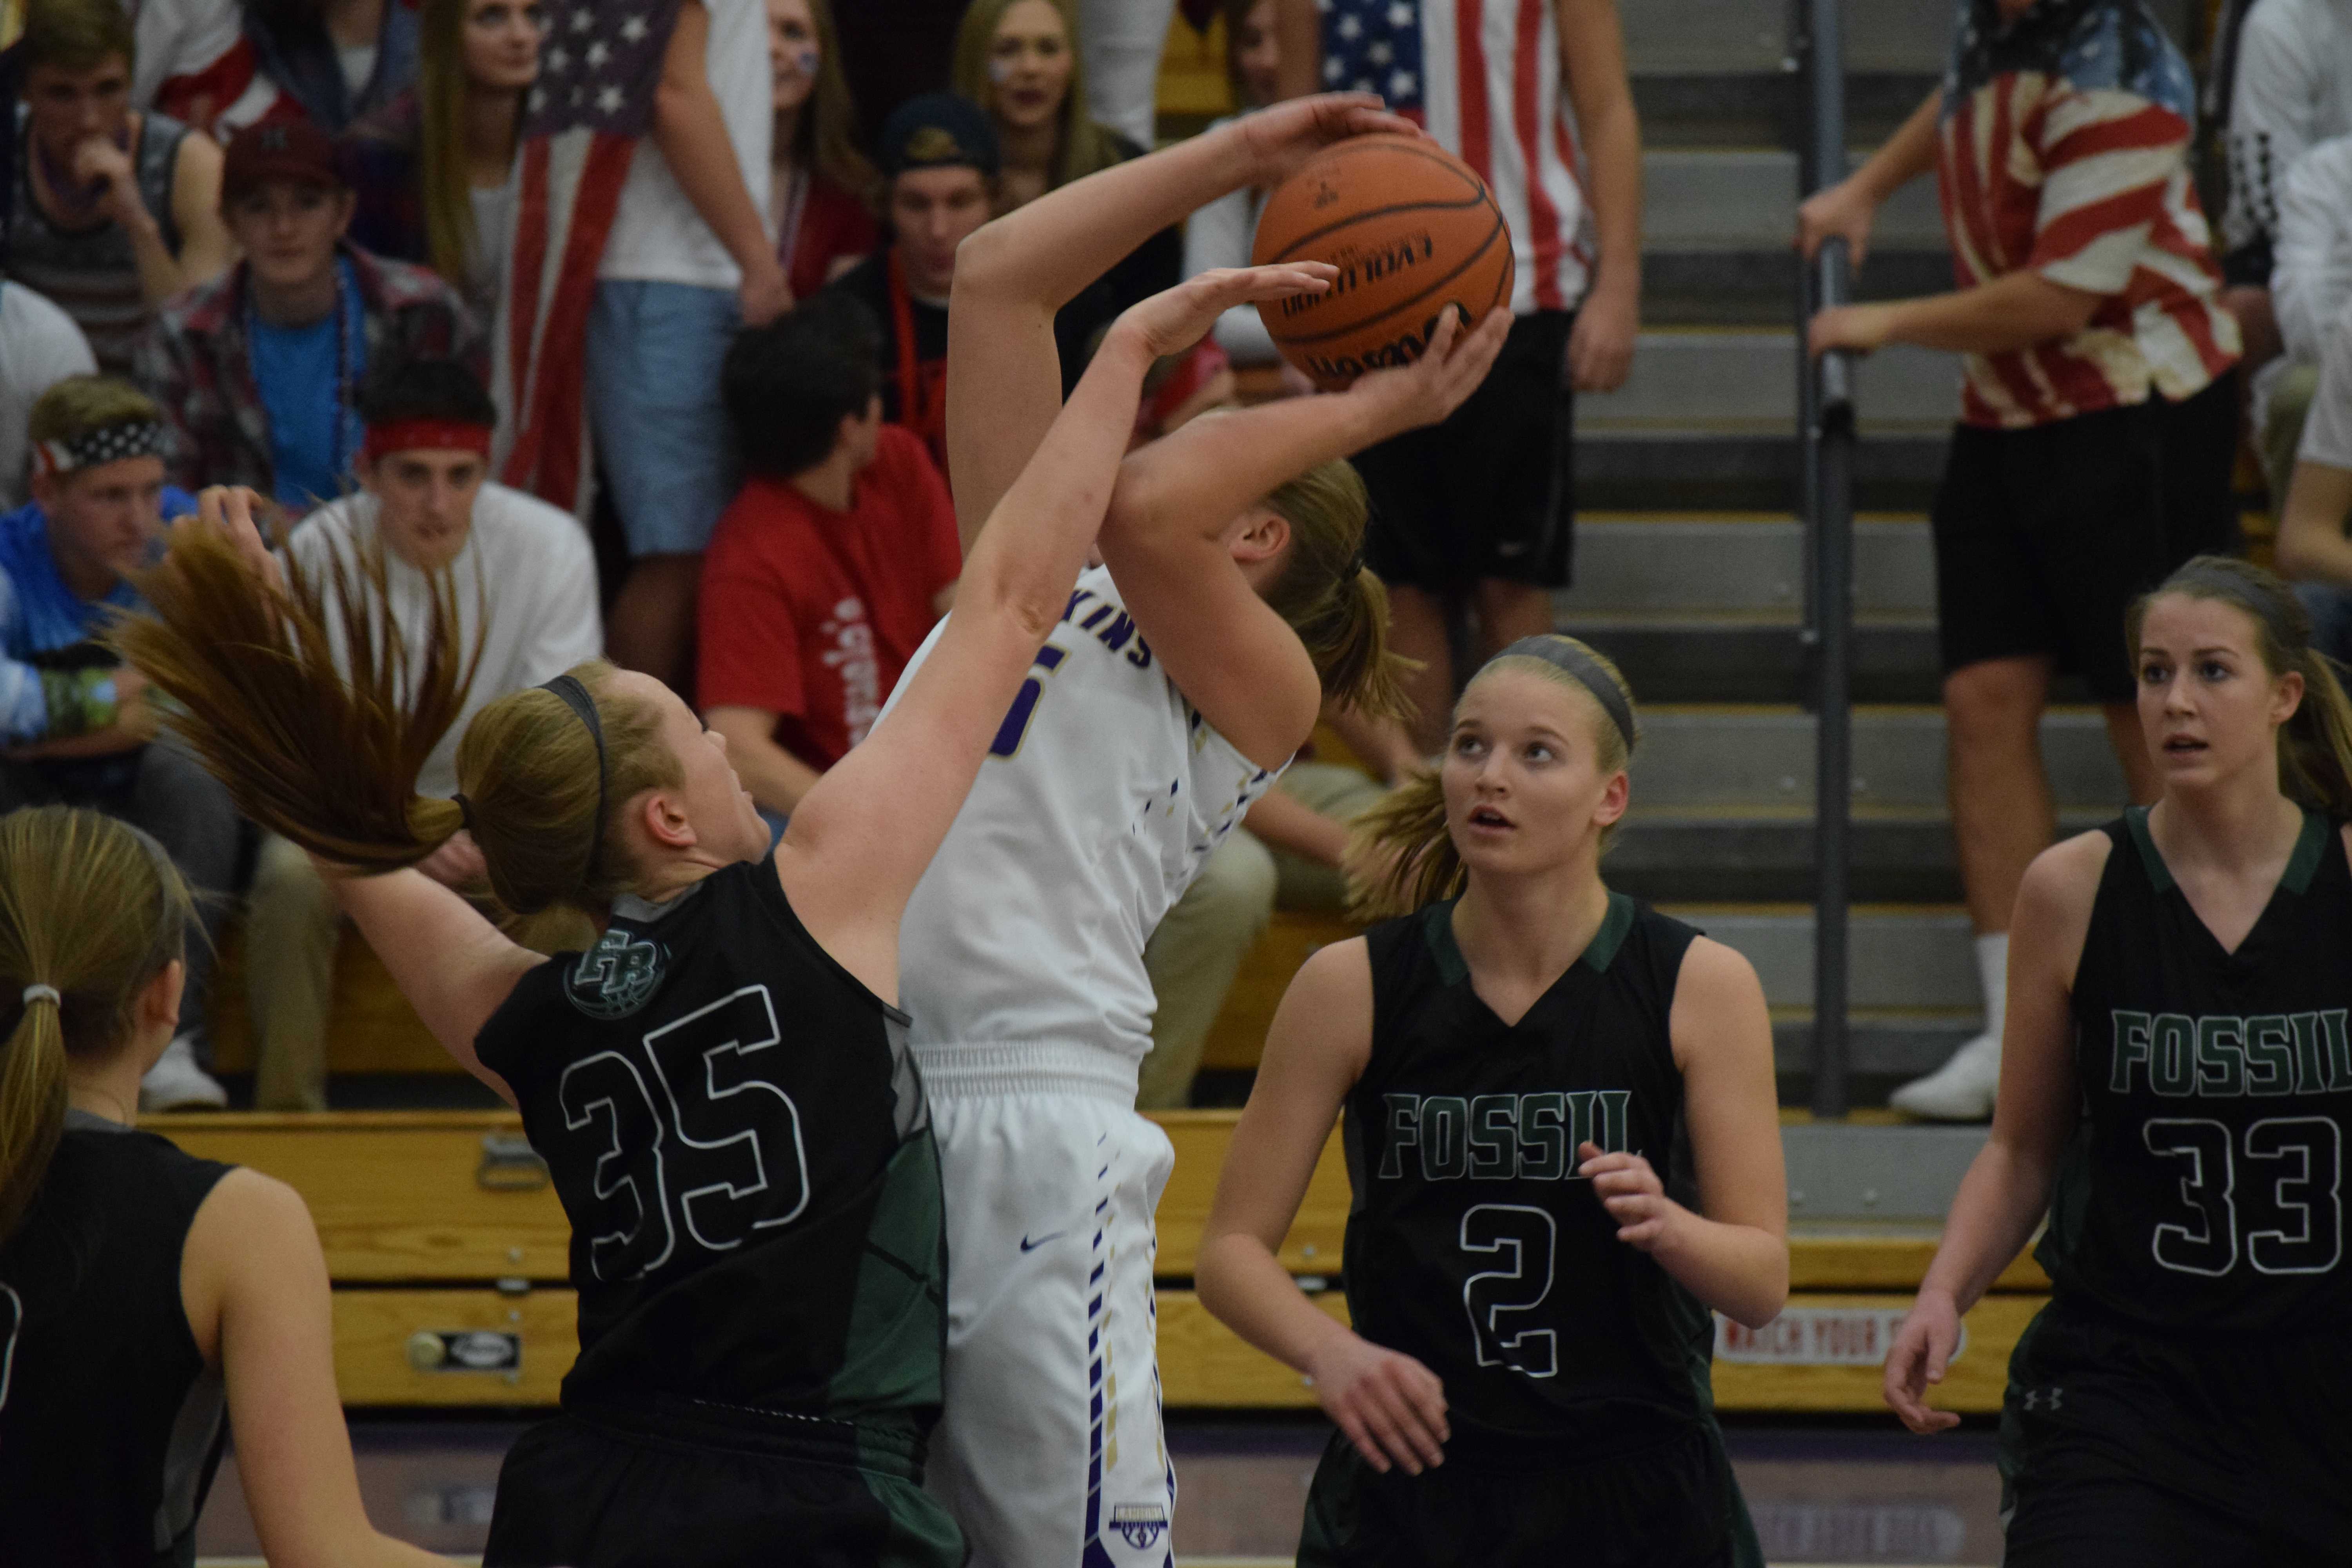 Reilly Dunn attempts to block Delsie Johnsons shot but ends up fouling her. Photo Credit: Haley Rockwell